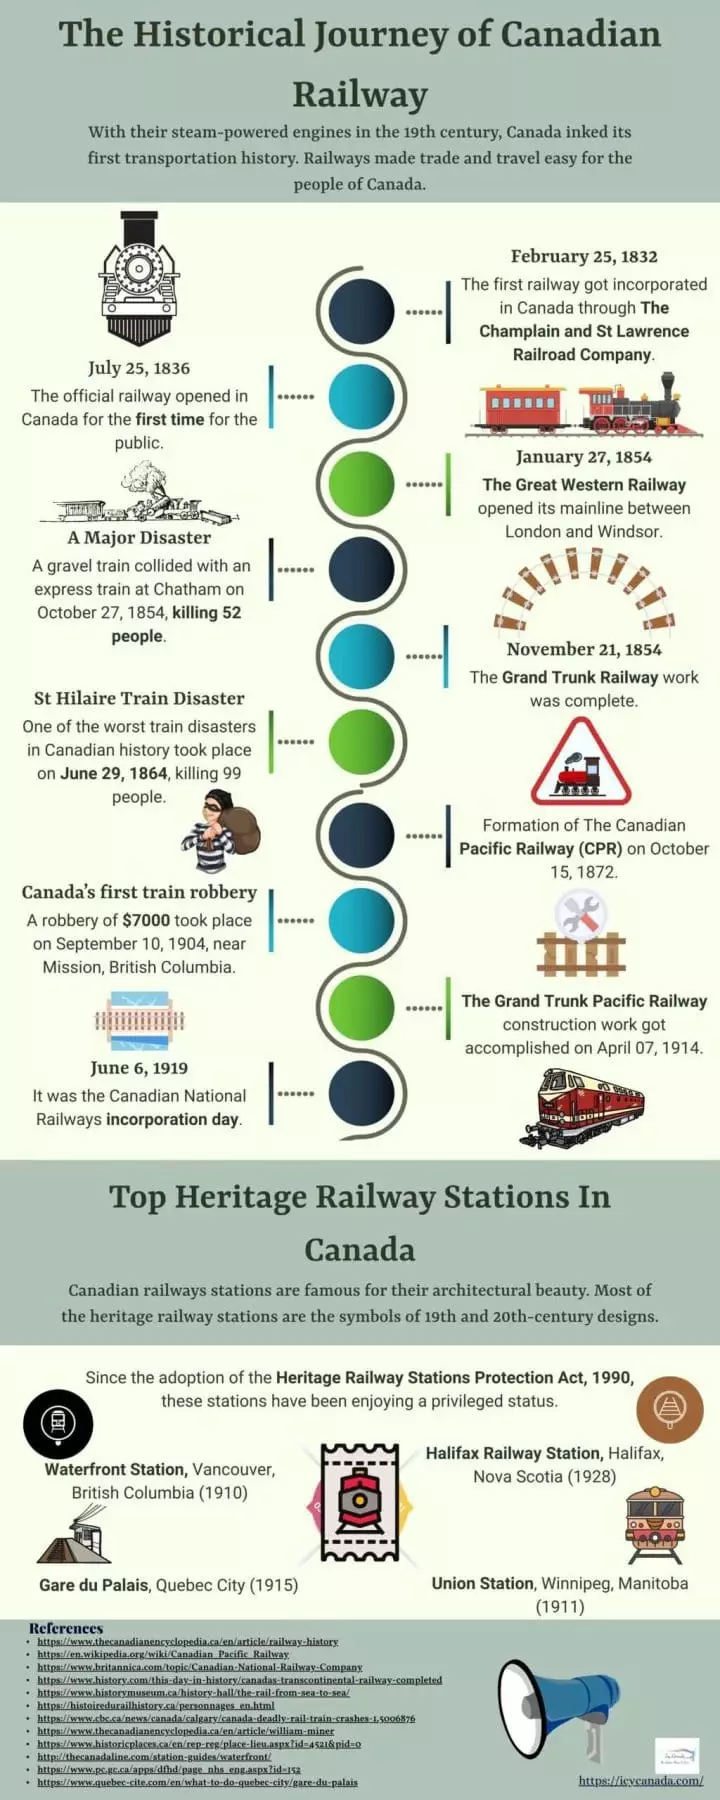 The Historical Journey of Canadian Railway